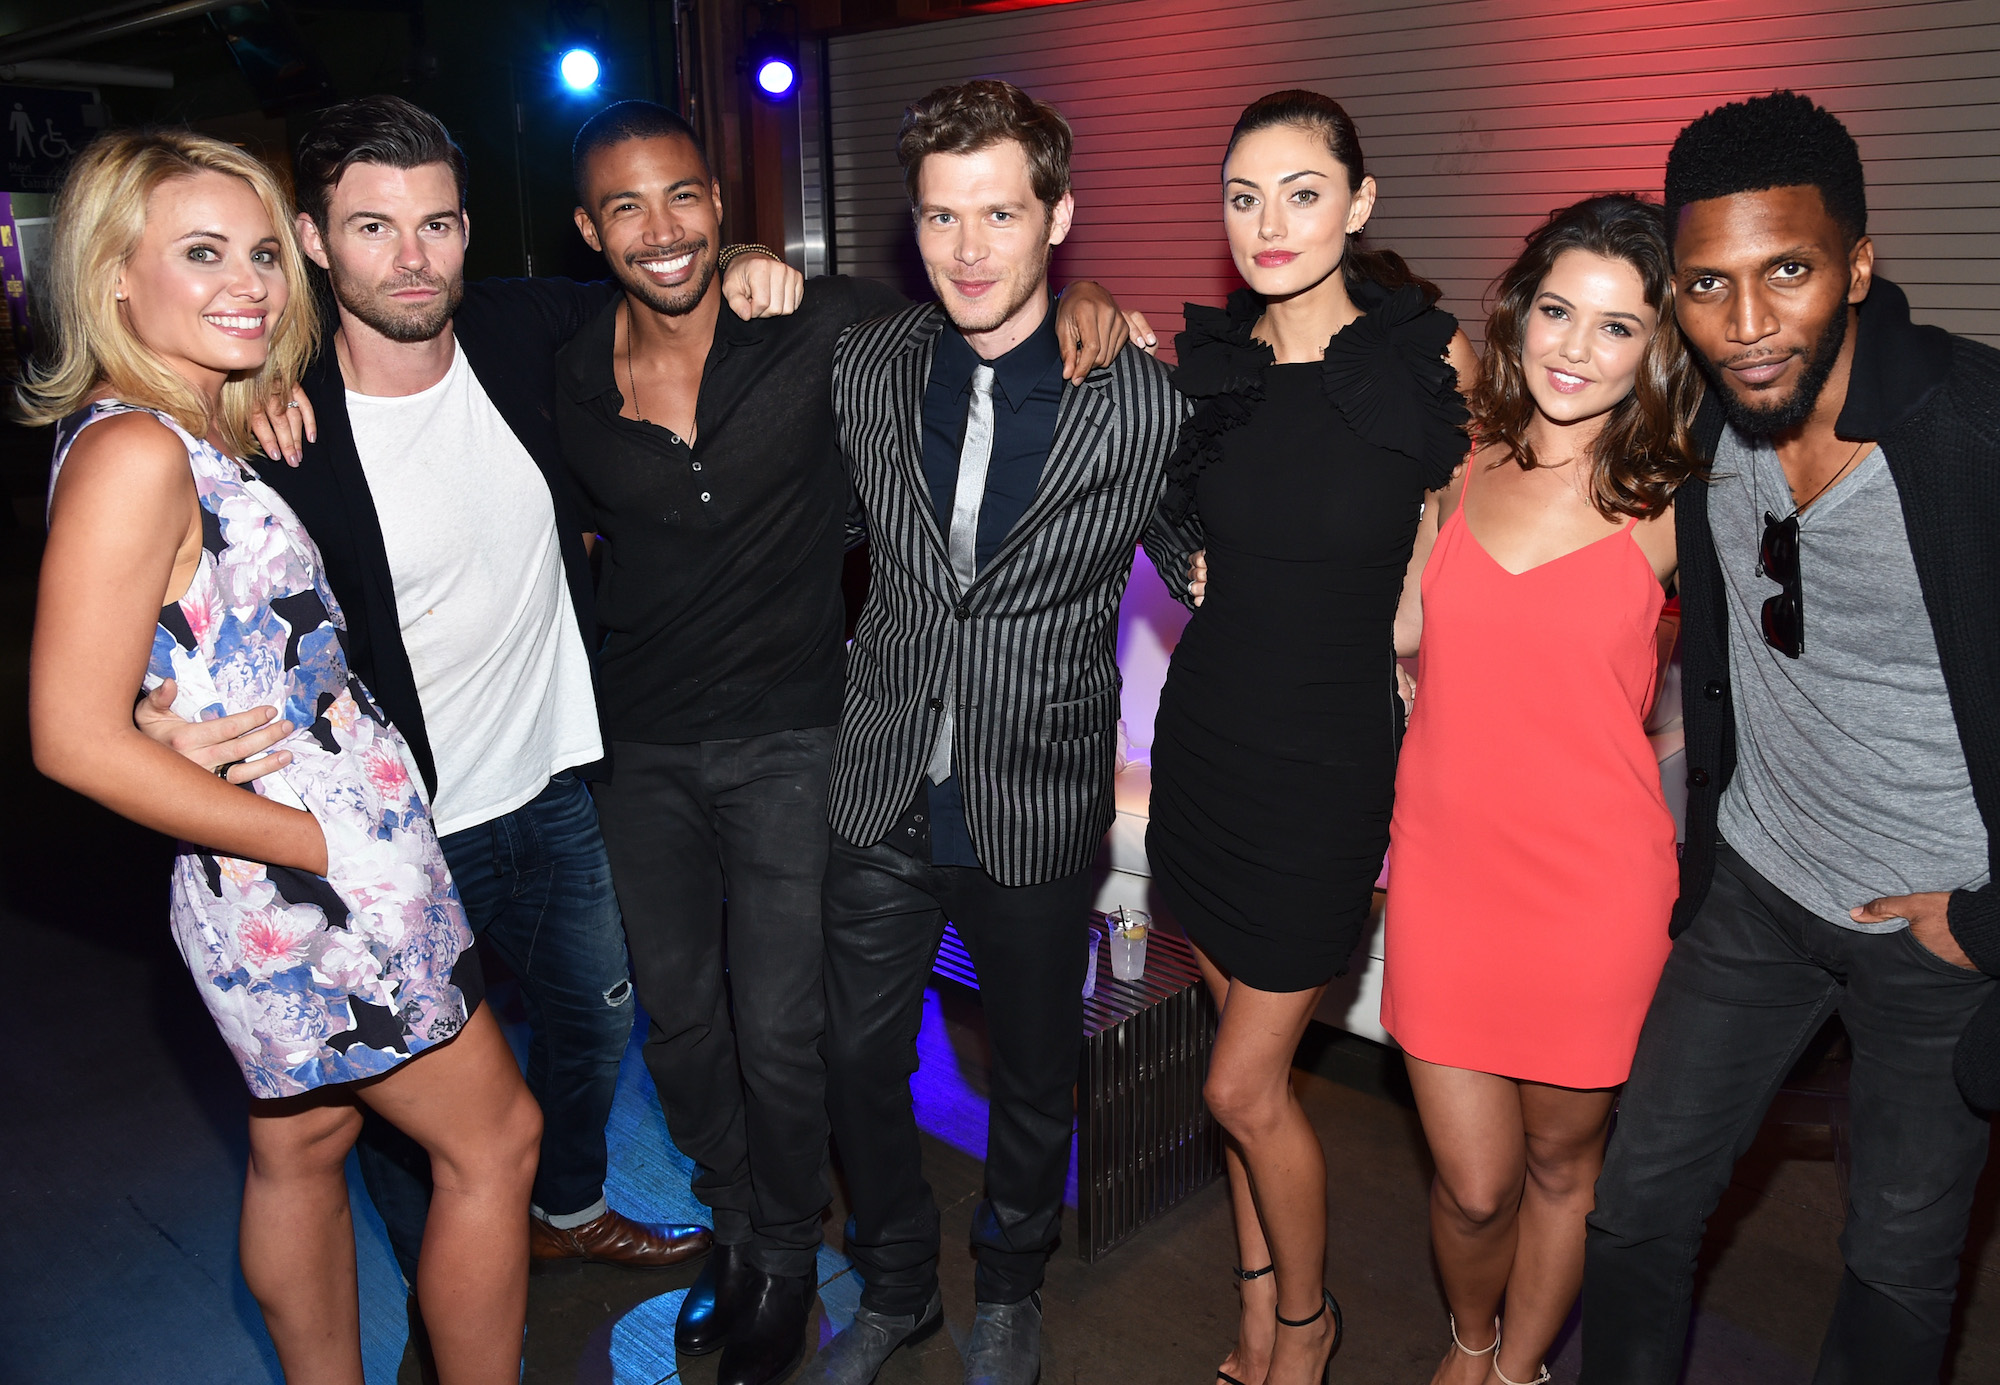 The Originals' Cast: Where Are They Now? | Us Weekly